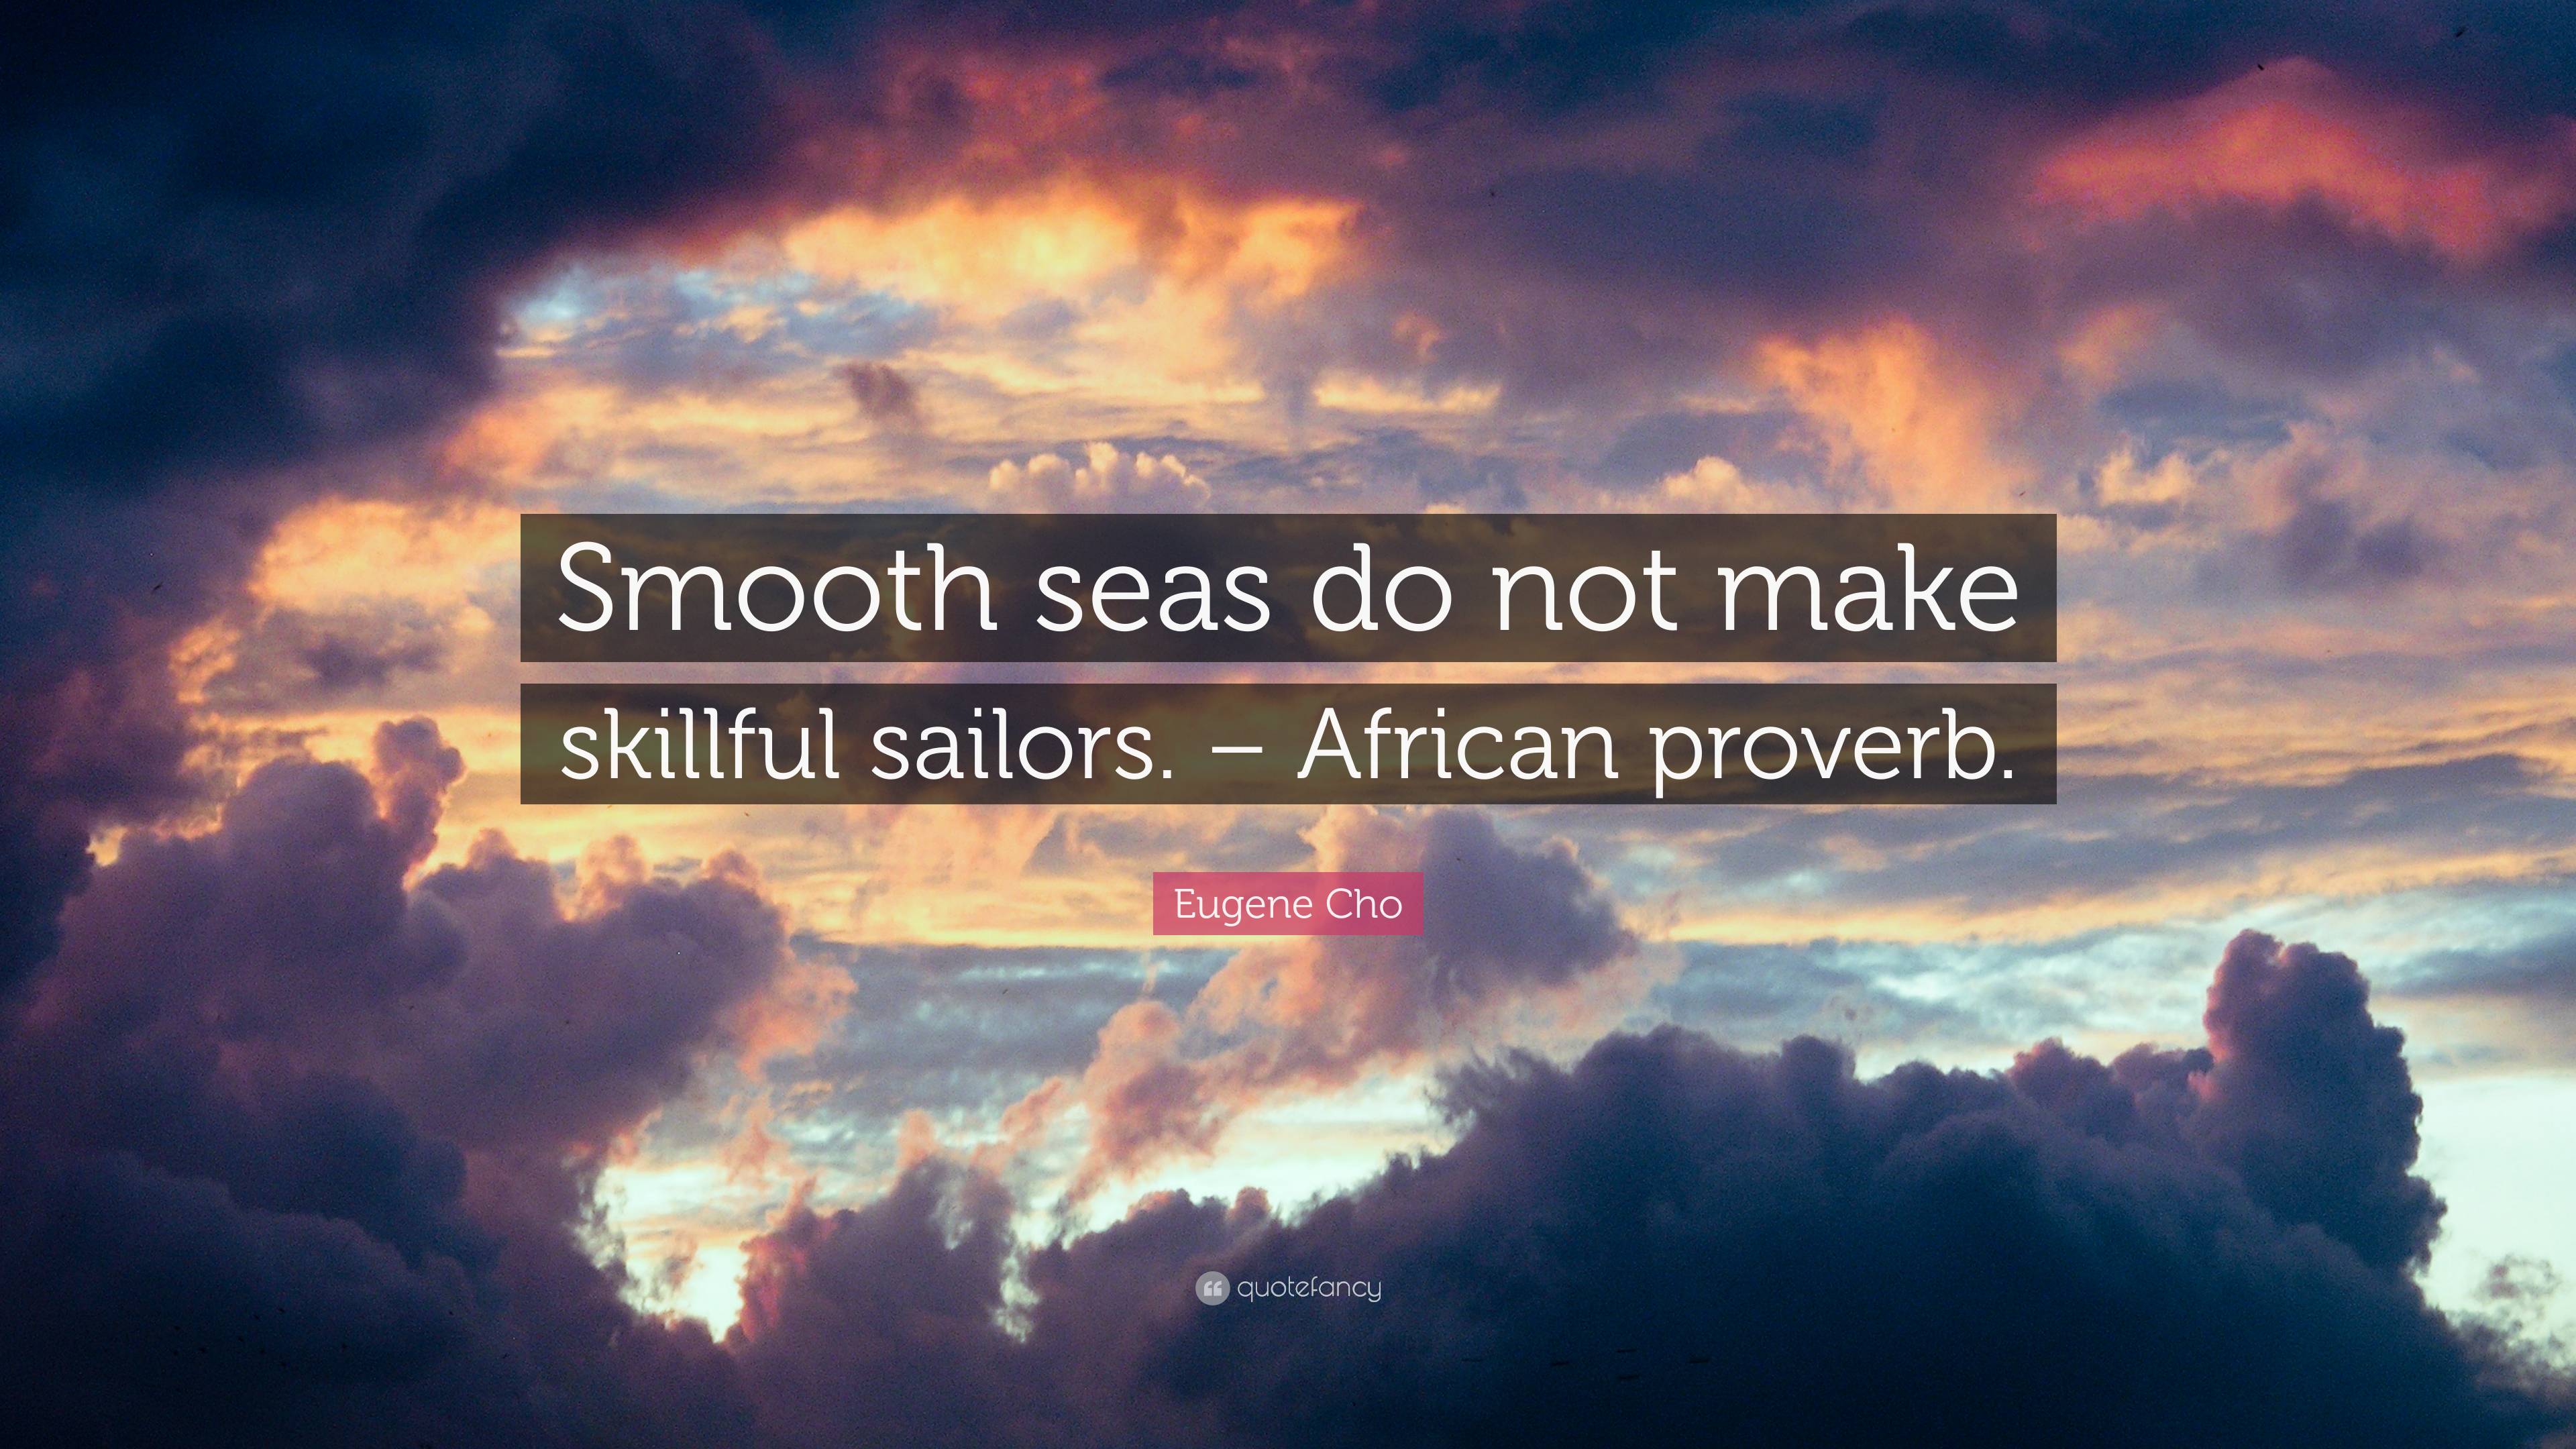 Eugene Cho Quote: “Smooth seas do not make skillful sailors. – African ...